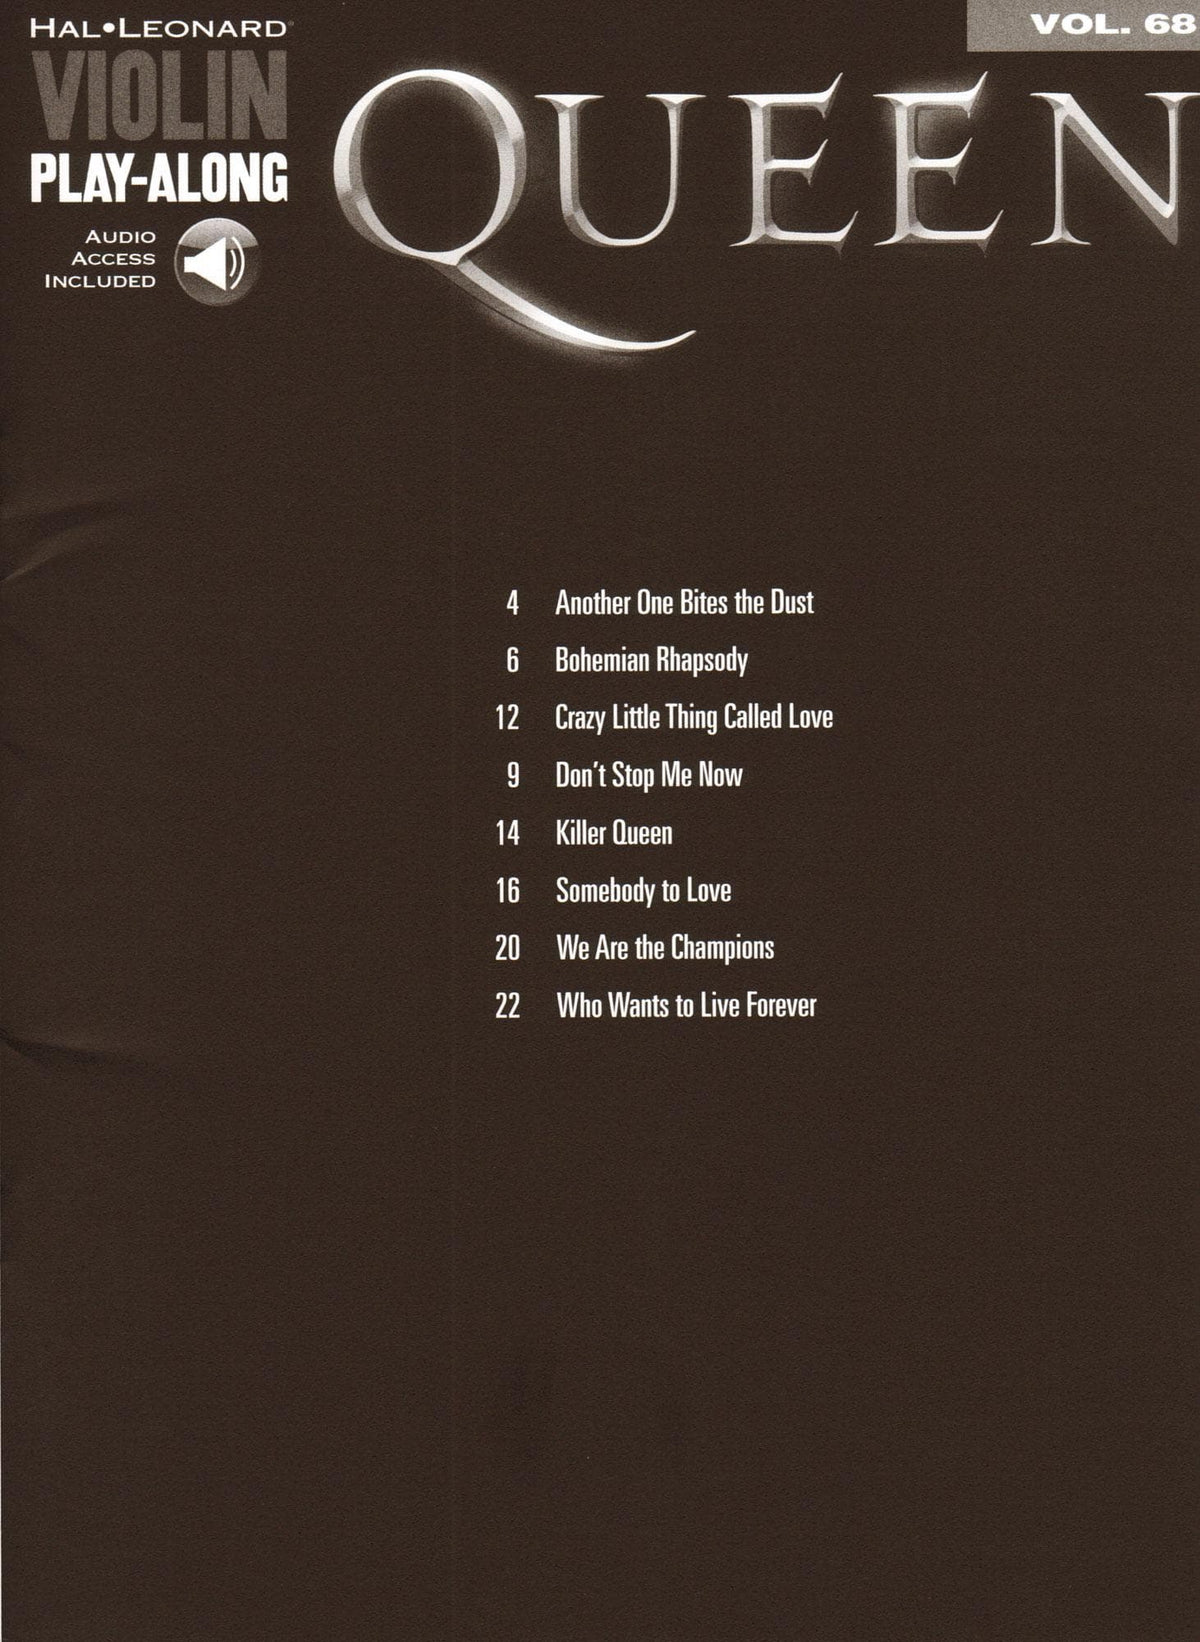 Queen - 8 Favorites - Violin Play-Along Vol. 68 - for Violin with Audio Accompaniment - Hal Leonard